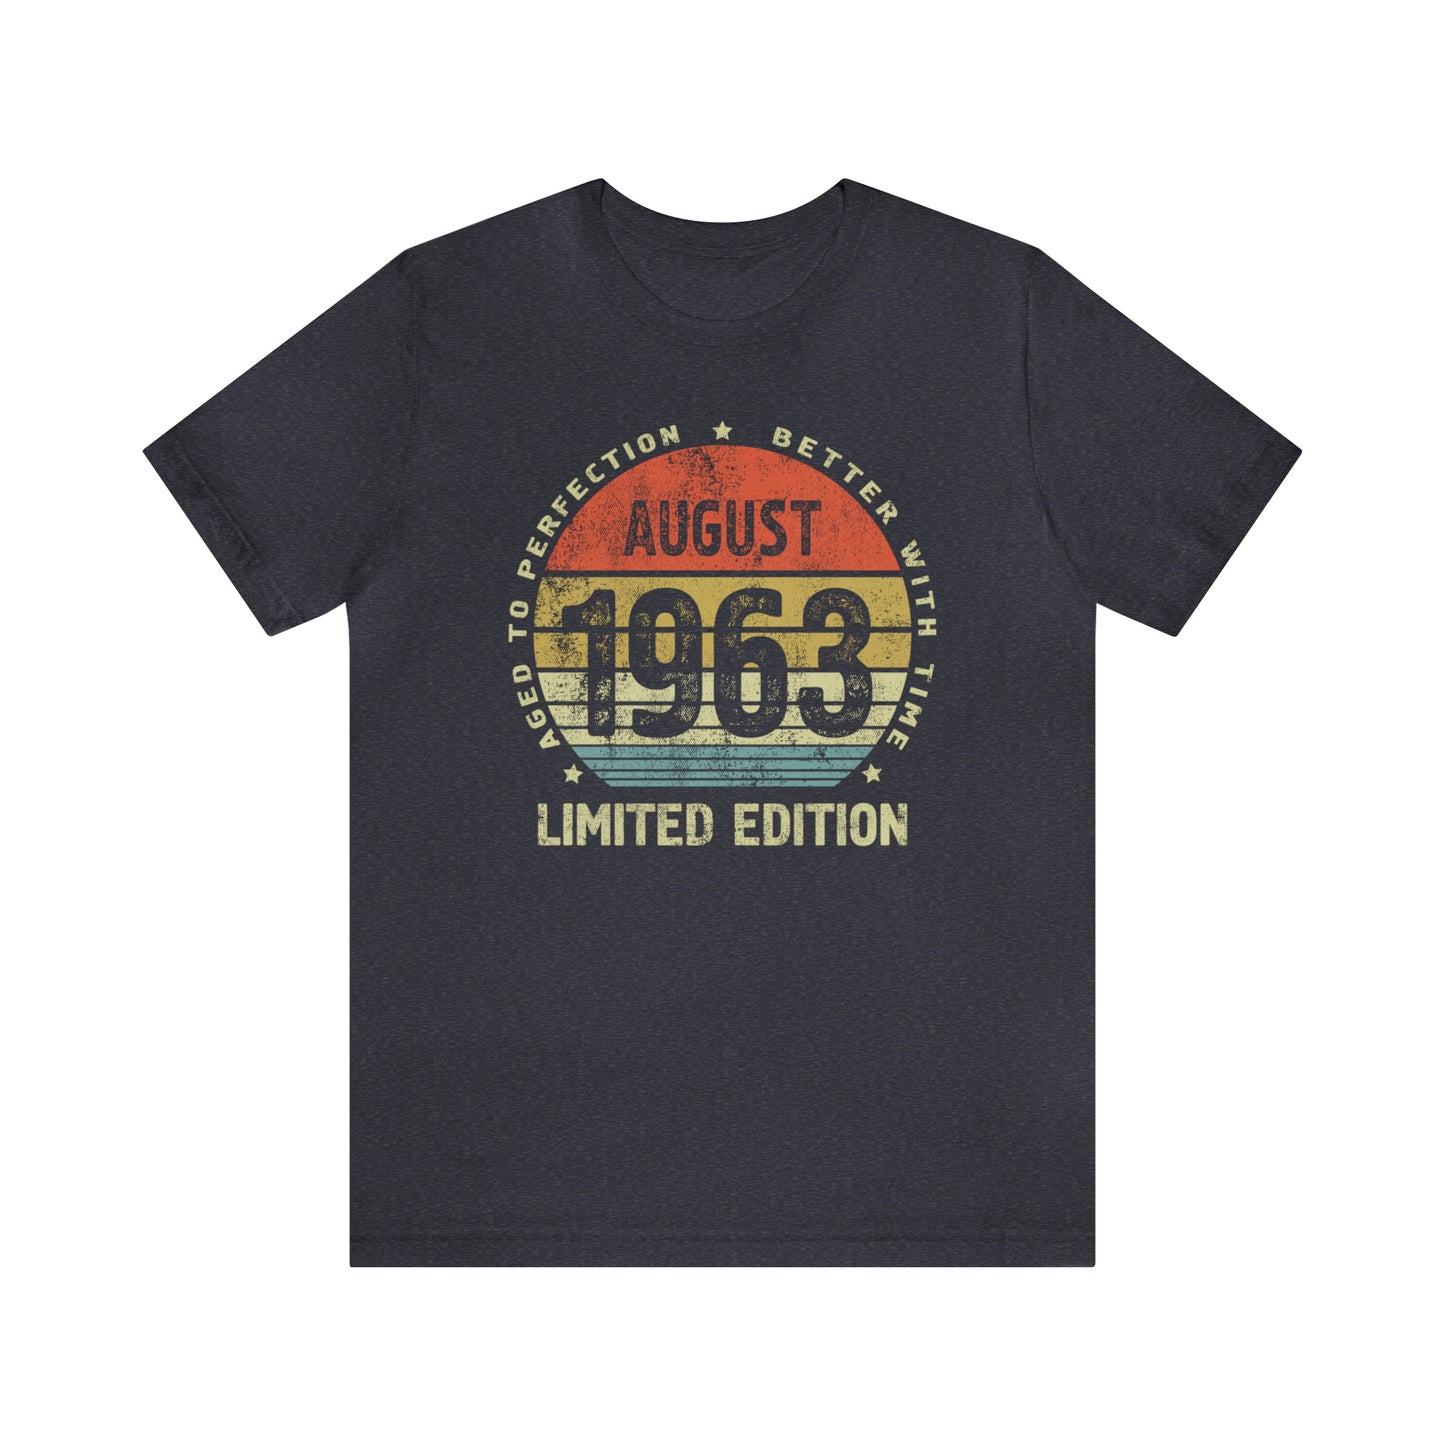 August 1963 birthday gift for men or women, Shirt for wife or husband